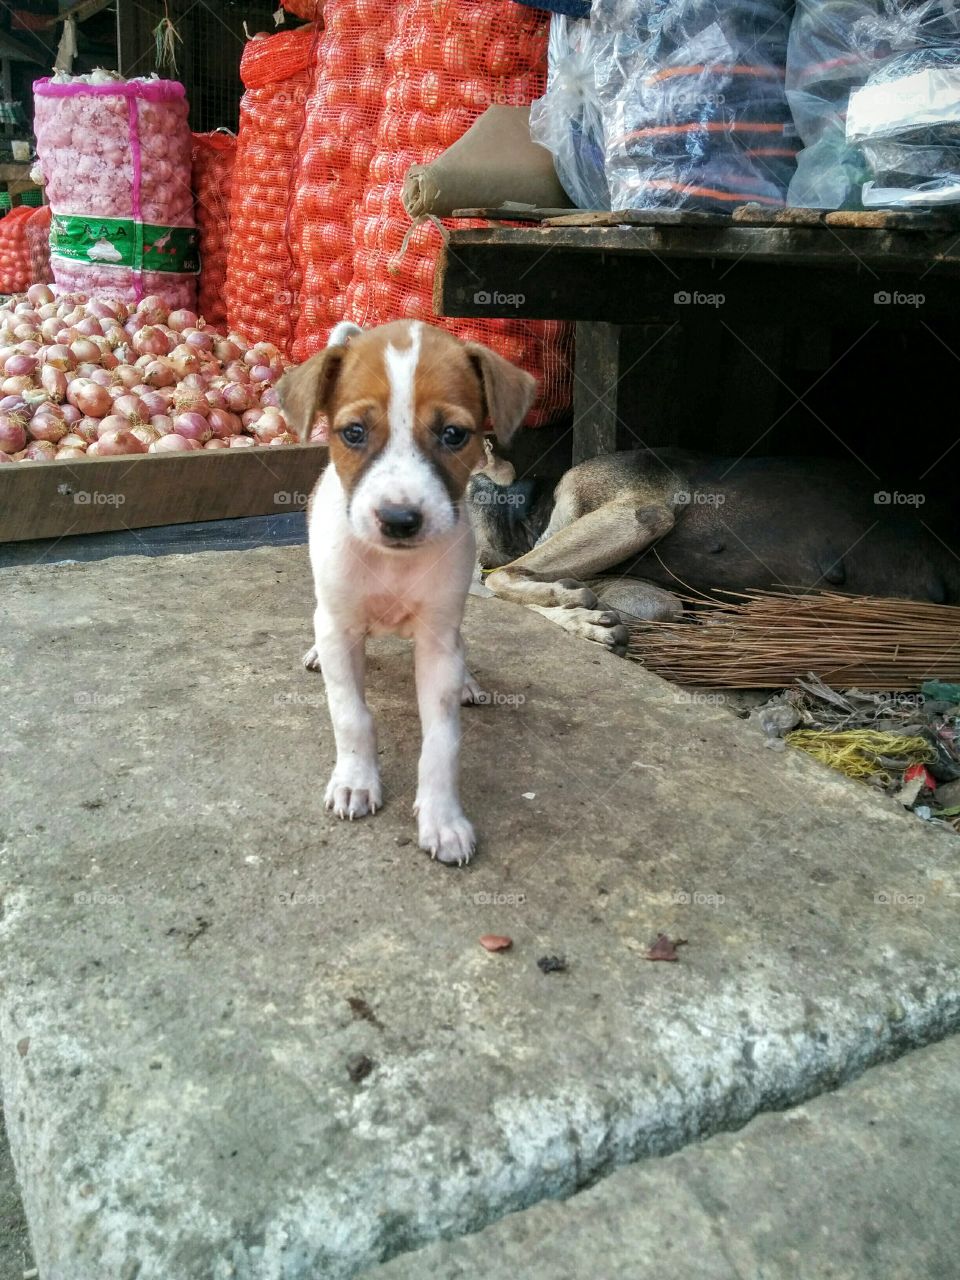 adorable puppy in a market